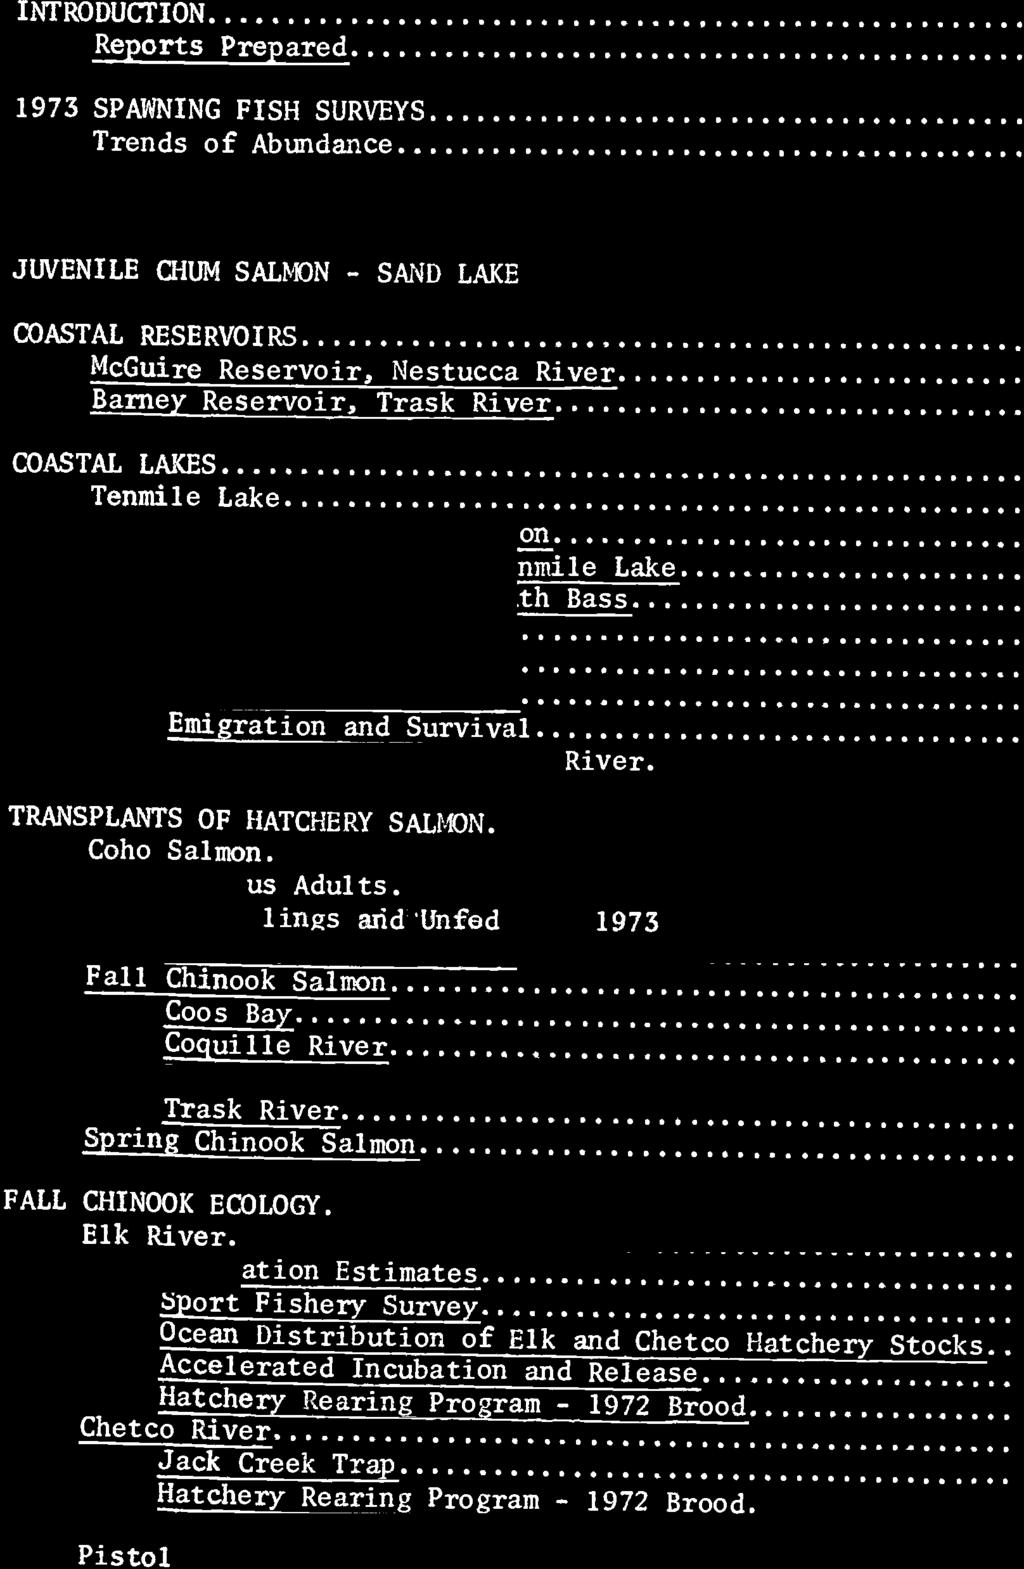 CONTENTS Page No. INTRODUCTION. Reports Prepaed 1973 SPAWNING FISH SURVEYS... Trends of Abundance... 3 3 PRIVATE SALNHATHERIES JUVENILE CHUM SALMON - SPIND LAKE COASTAL RESERVOIRS.